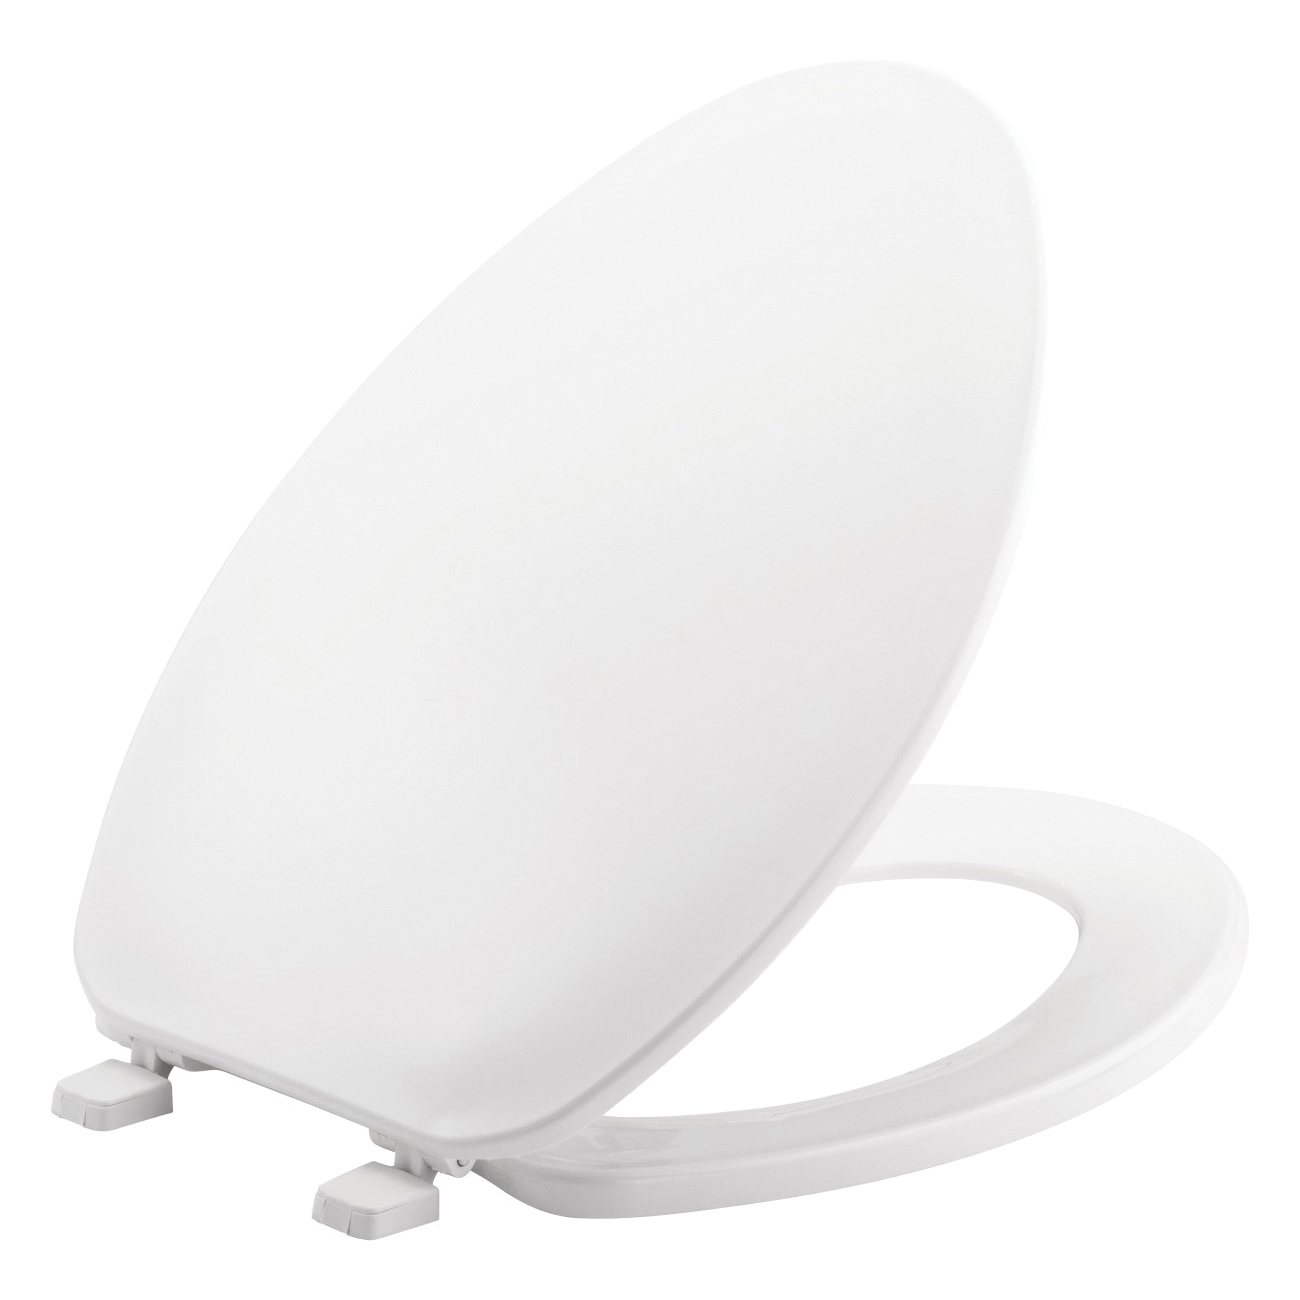 Bemis® 7B170TK 000 Model 170TK Heavy Duty Toilet Seat With Cover, Elongated Bowl, Closed Front, Plastic, White, Top-Tite® Hinge